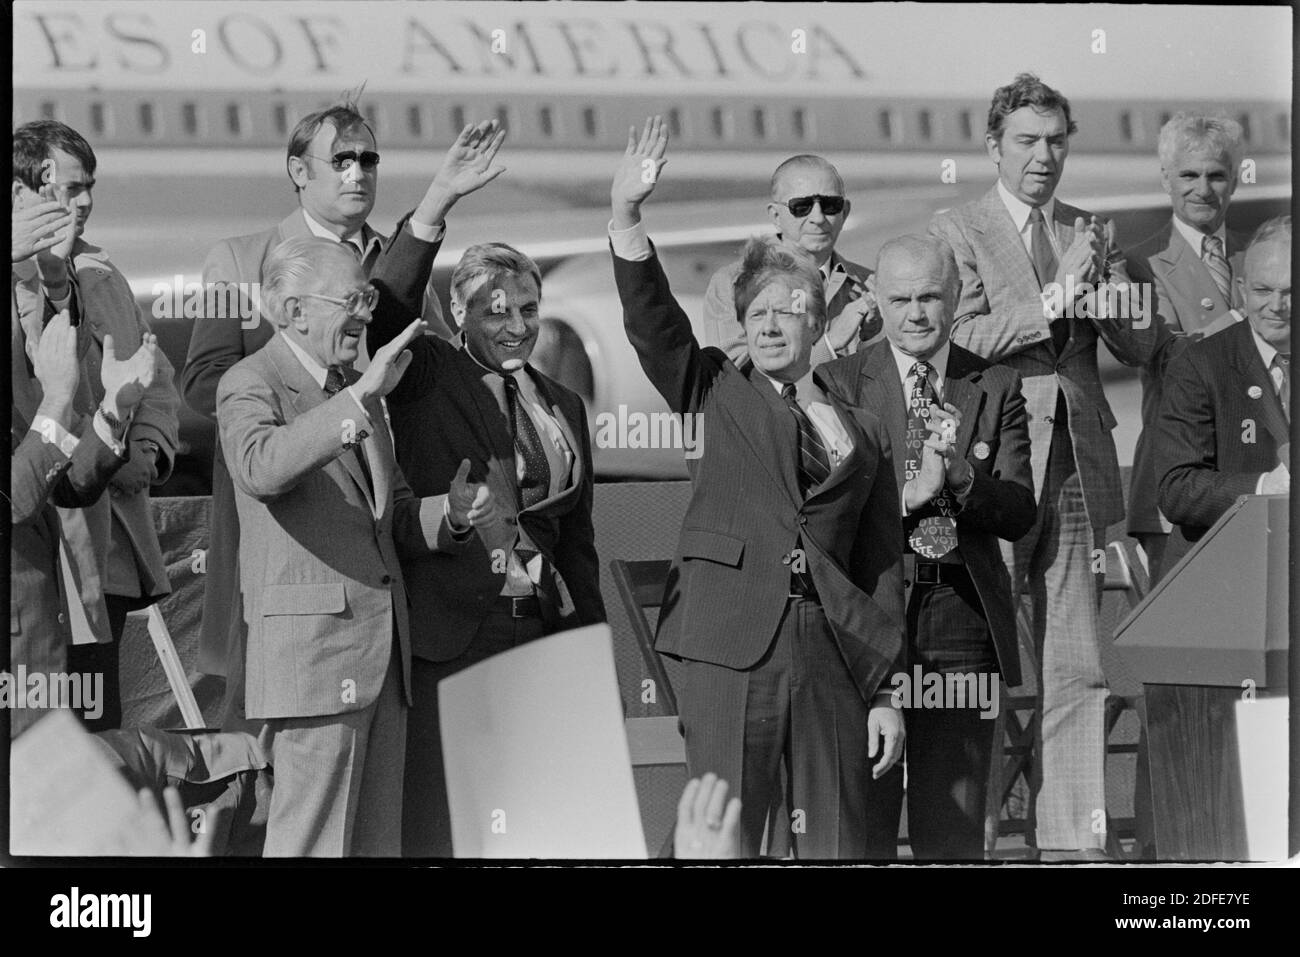 President Jimmy Carter and vice-president Walter Mondale make a campaign stop in Cleveland Ohio in 1980. At left is US Senator Howard Metzenbaum. At right is US Senator John Glenn and US Rep. John Seiberling. Ernie Mastroianni photo Stock Photo